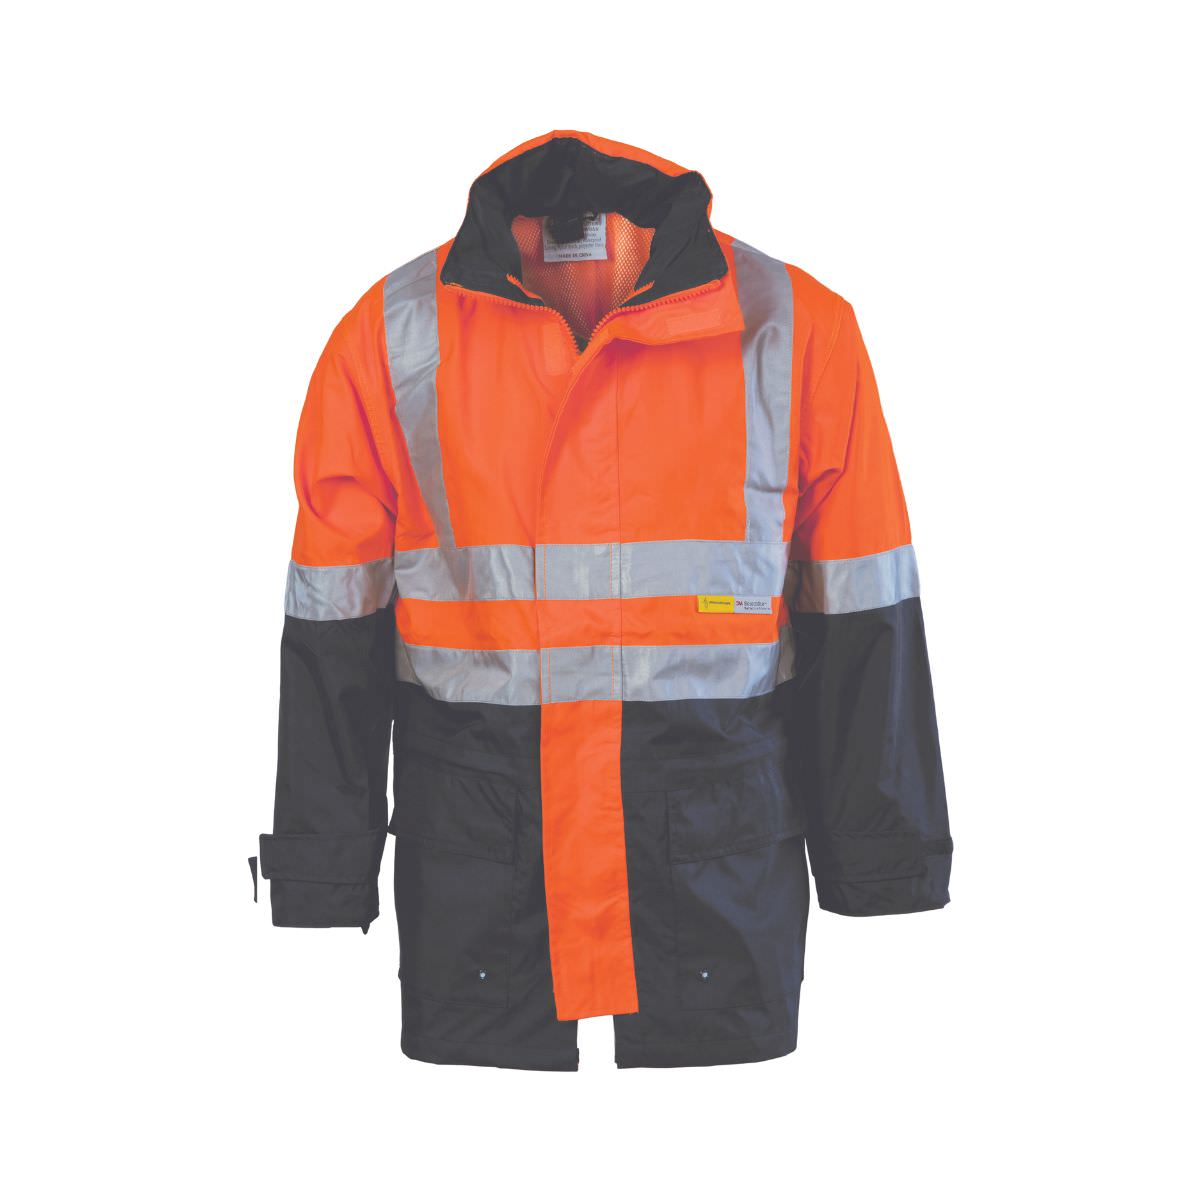 DNC HiVis Two Tone Breathable Rain Jacket with 3M Reflective Tape 3867